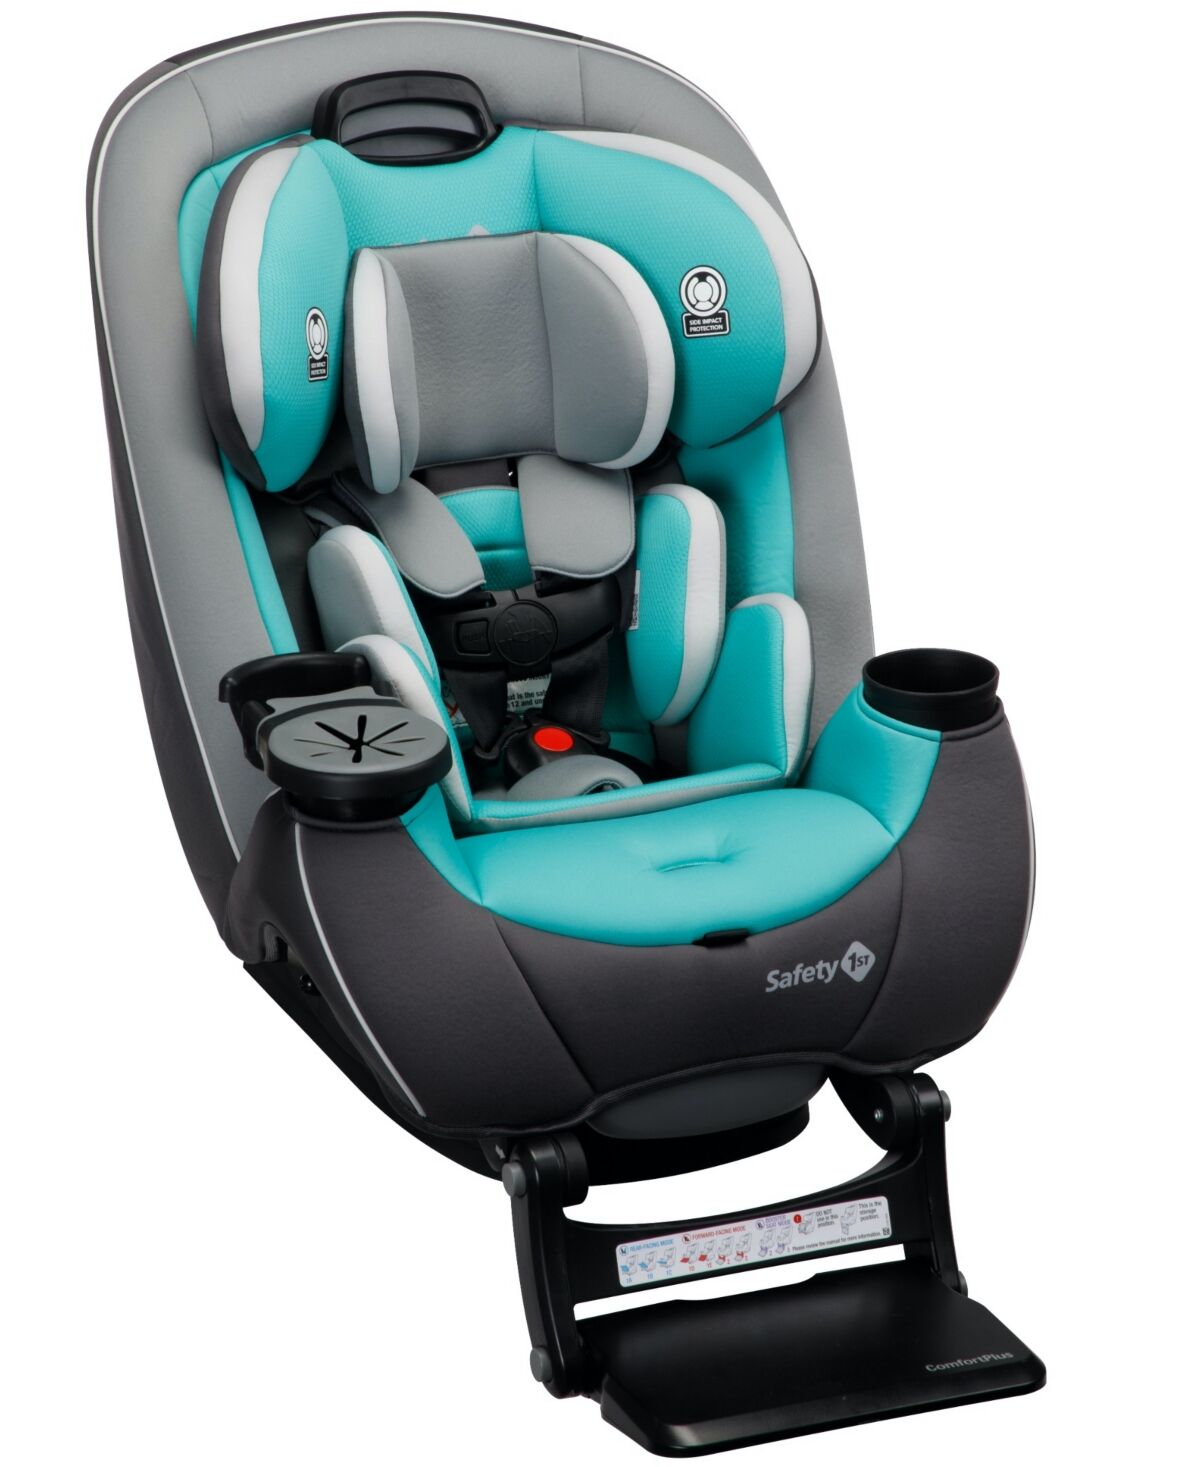 Safety 1st Baby Grow and Go Extend N Ride Lx Convertible One-Hand Adjust Car Seat - Seas the Day